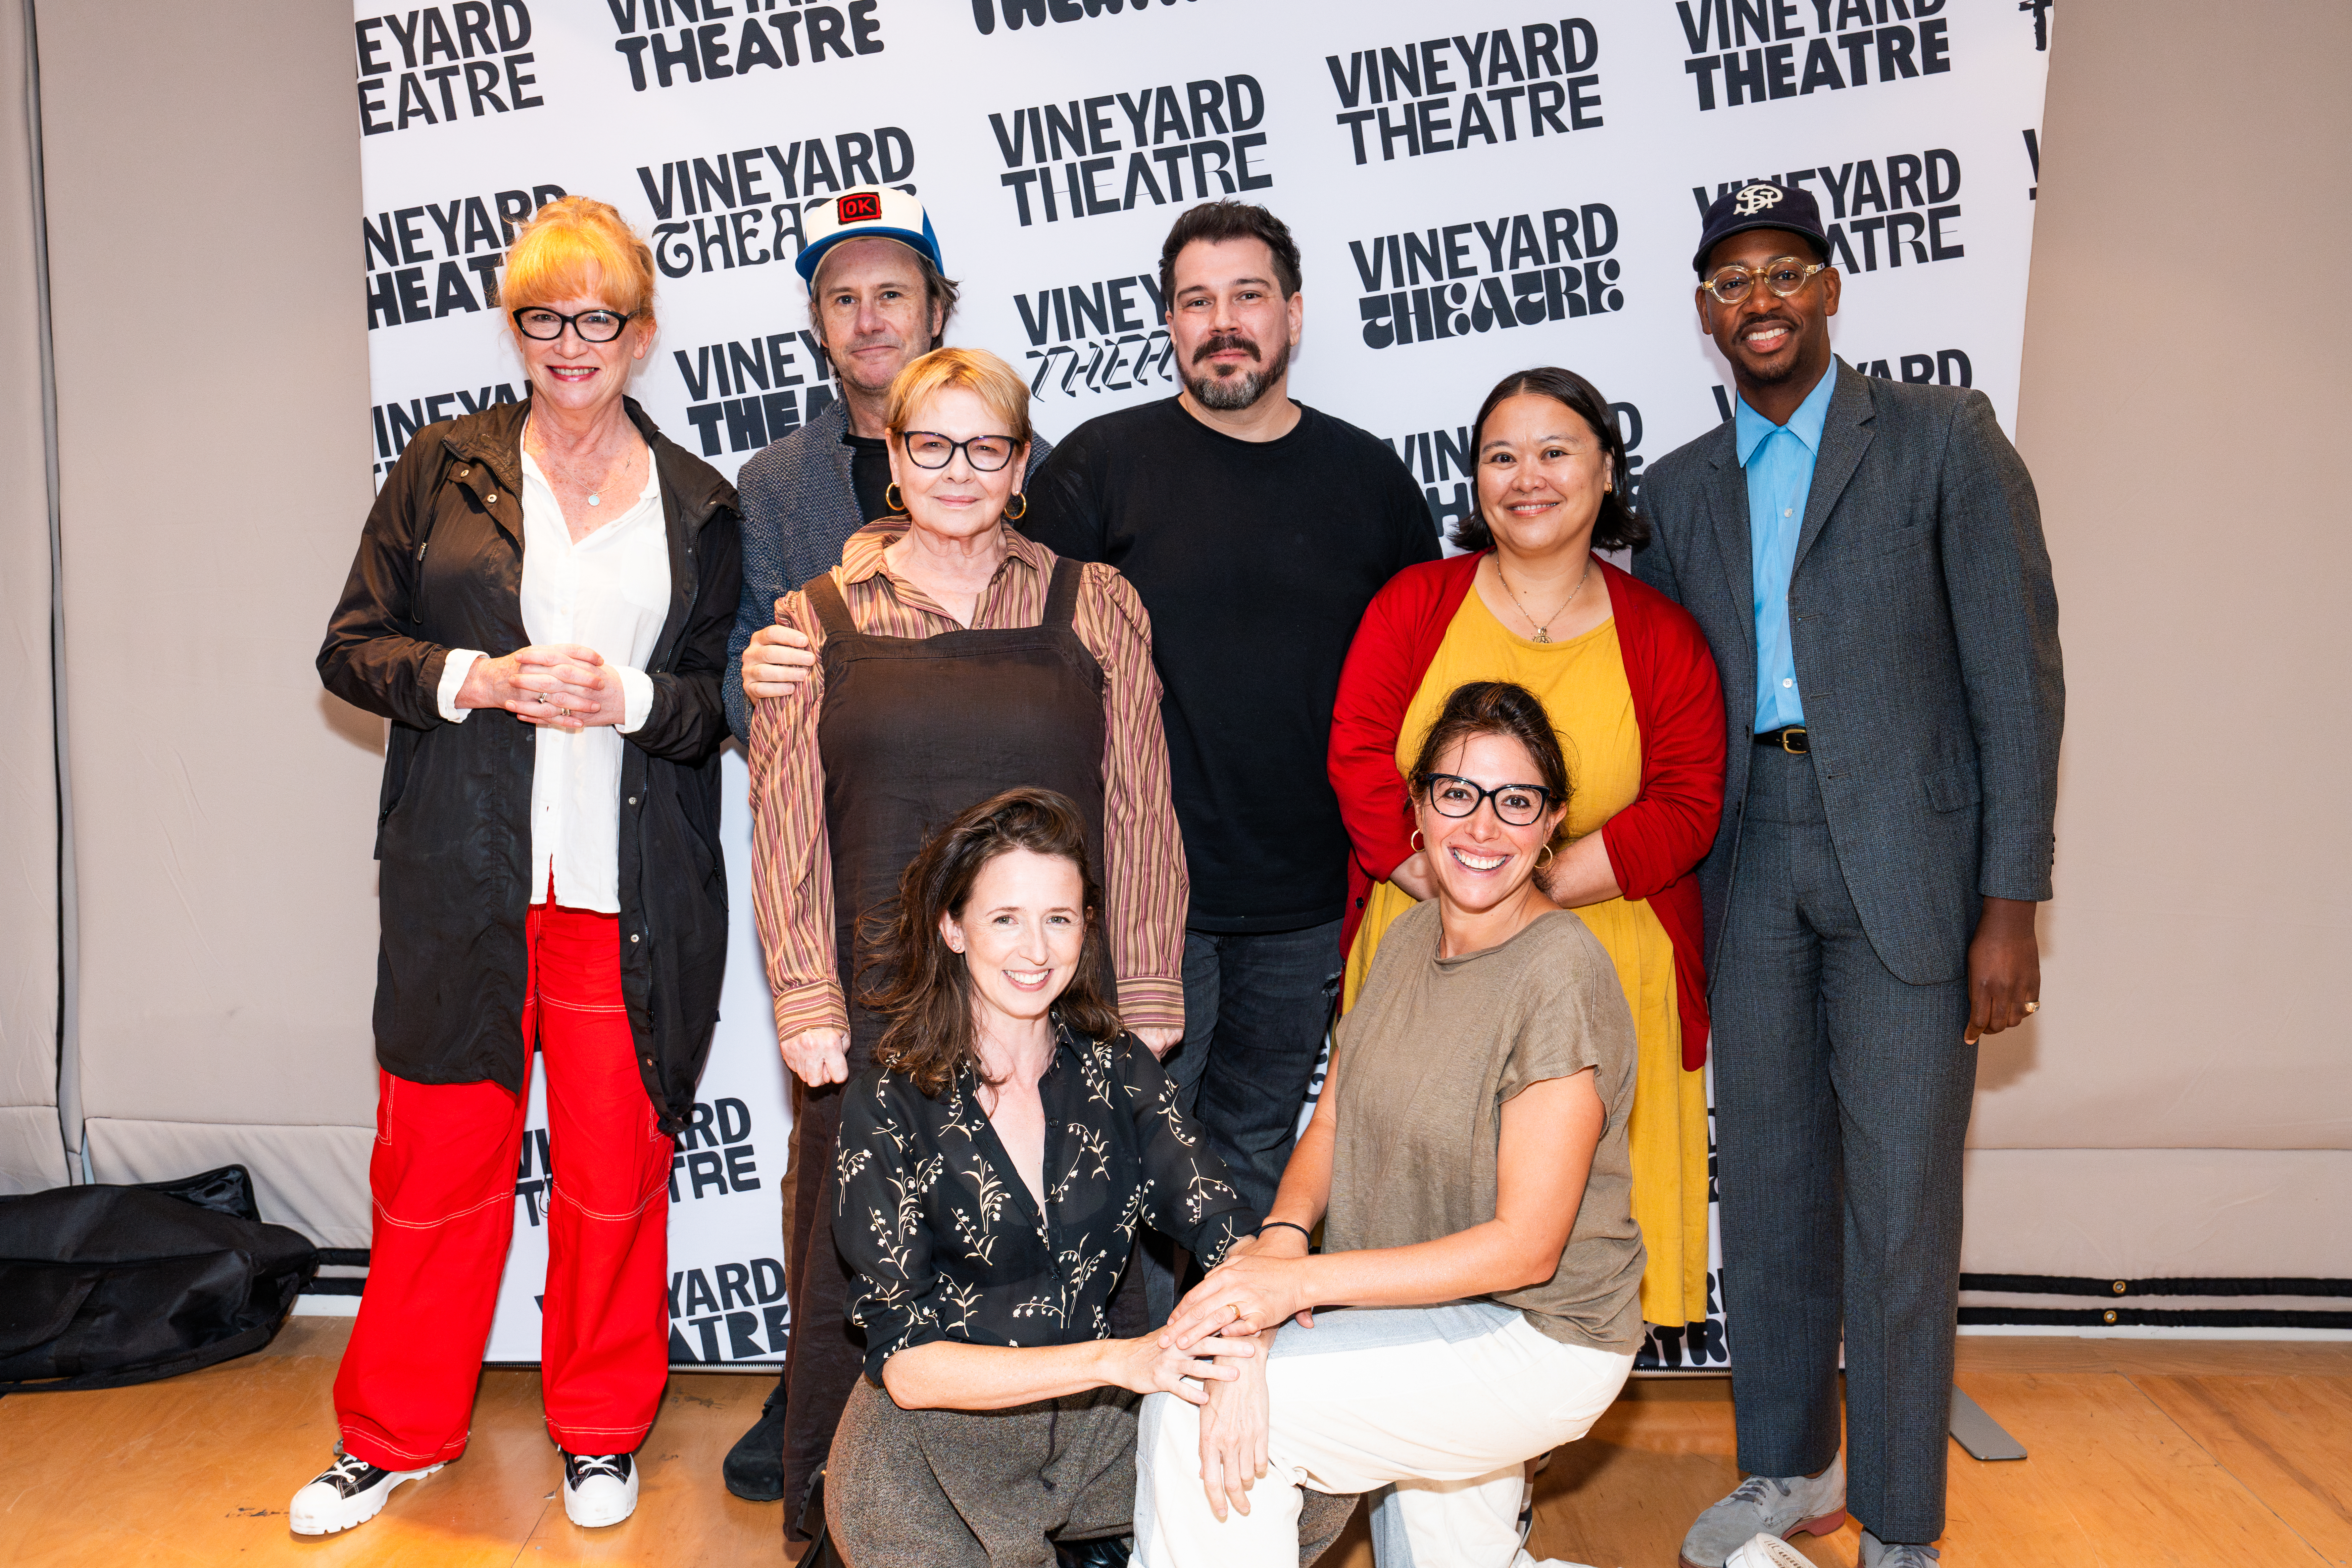 1. The Cast of Scene Partners at Vineyard Theatre   Credit Carrington Spires